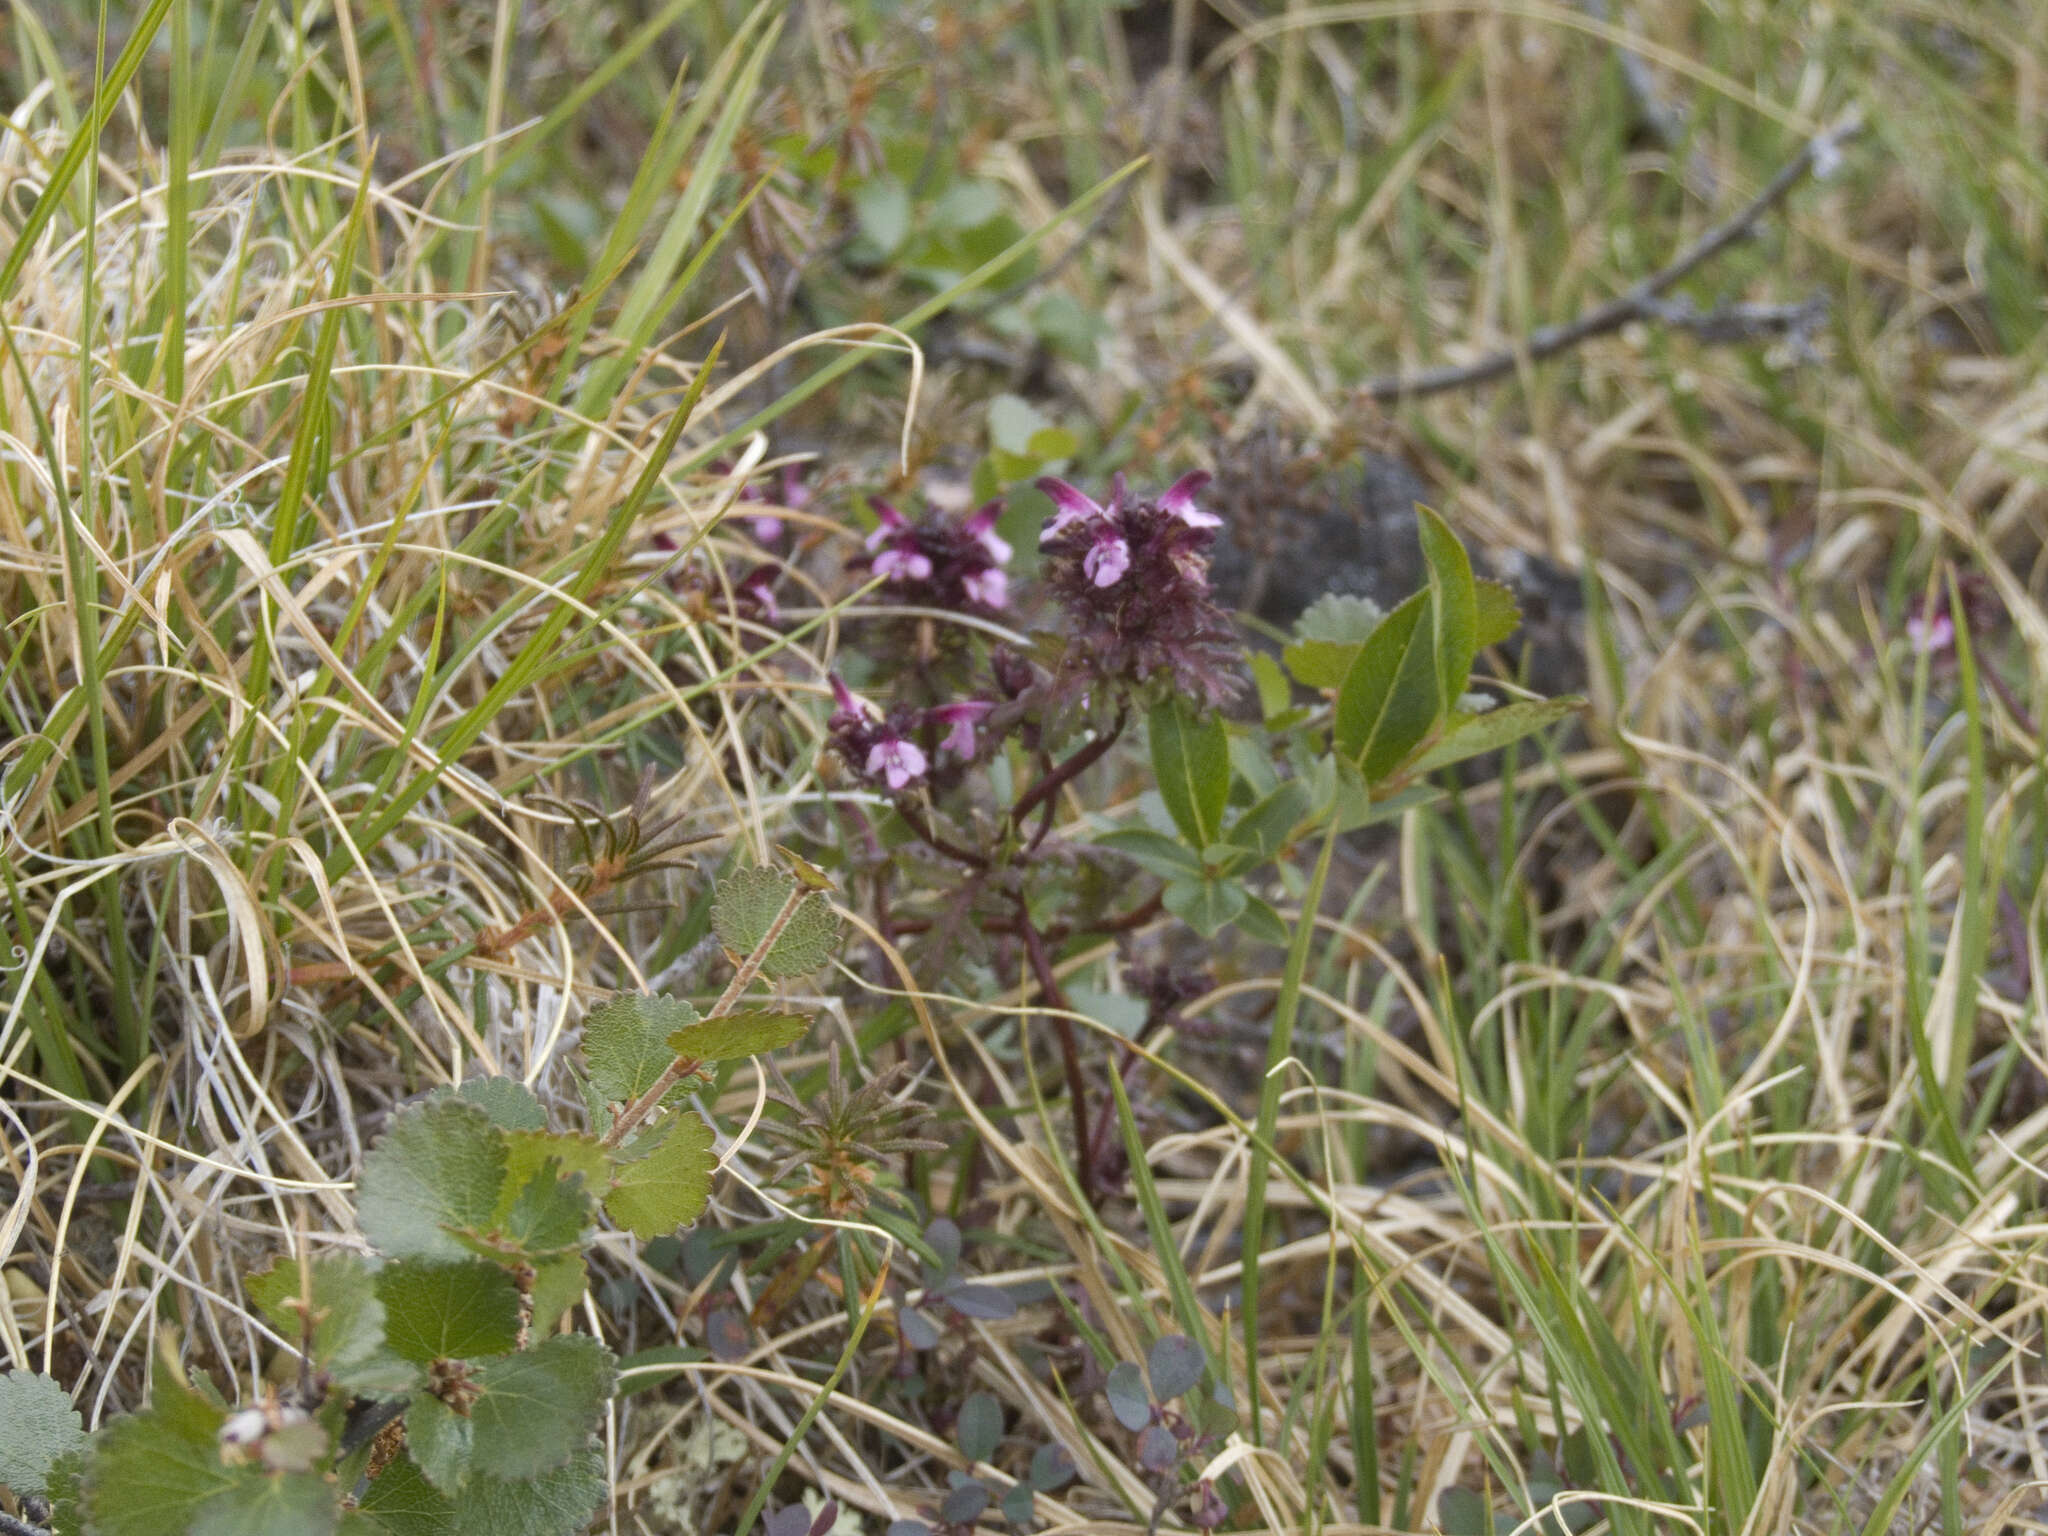 Image of Pennell's lousewort